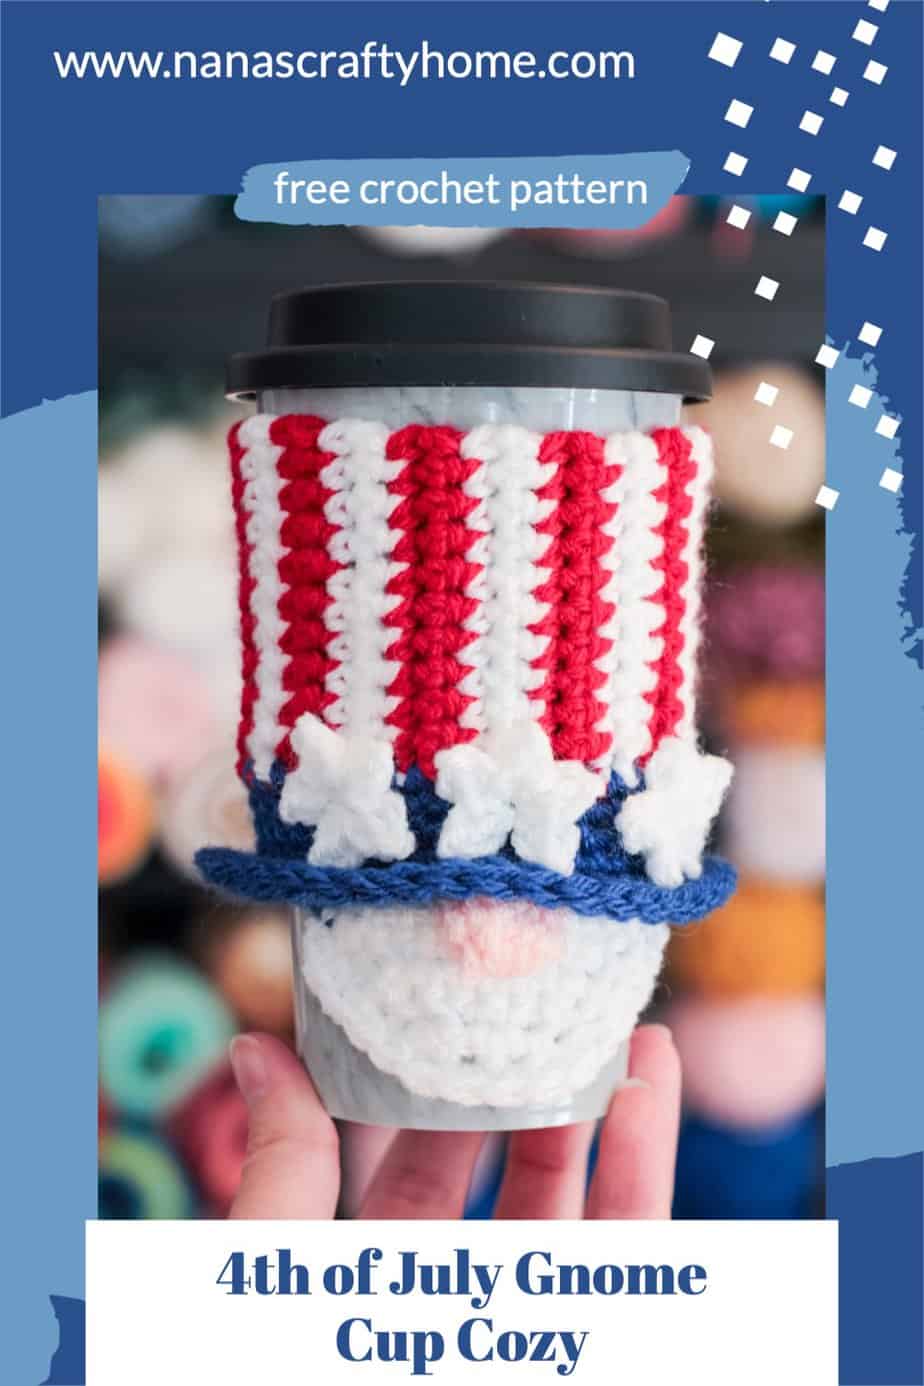 4th of July Gnome crochet cup cozy pattern